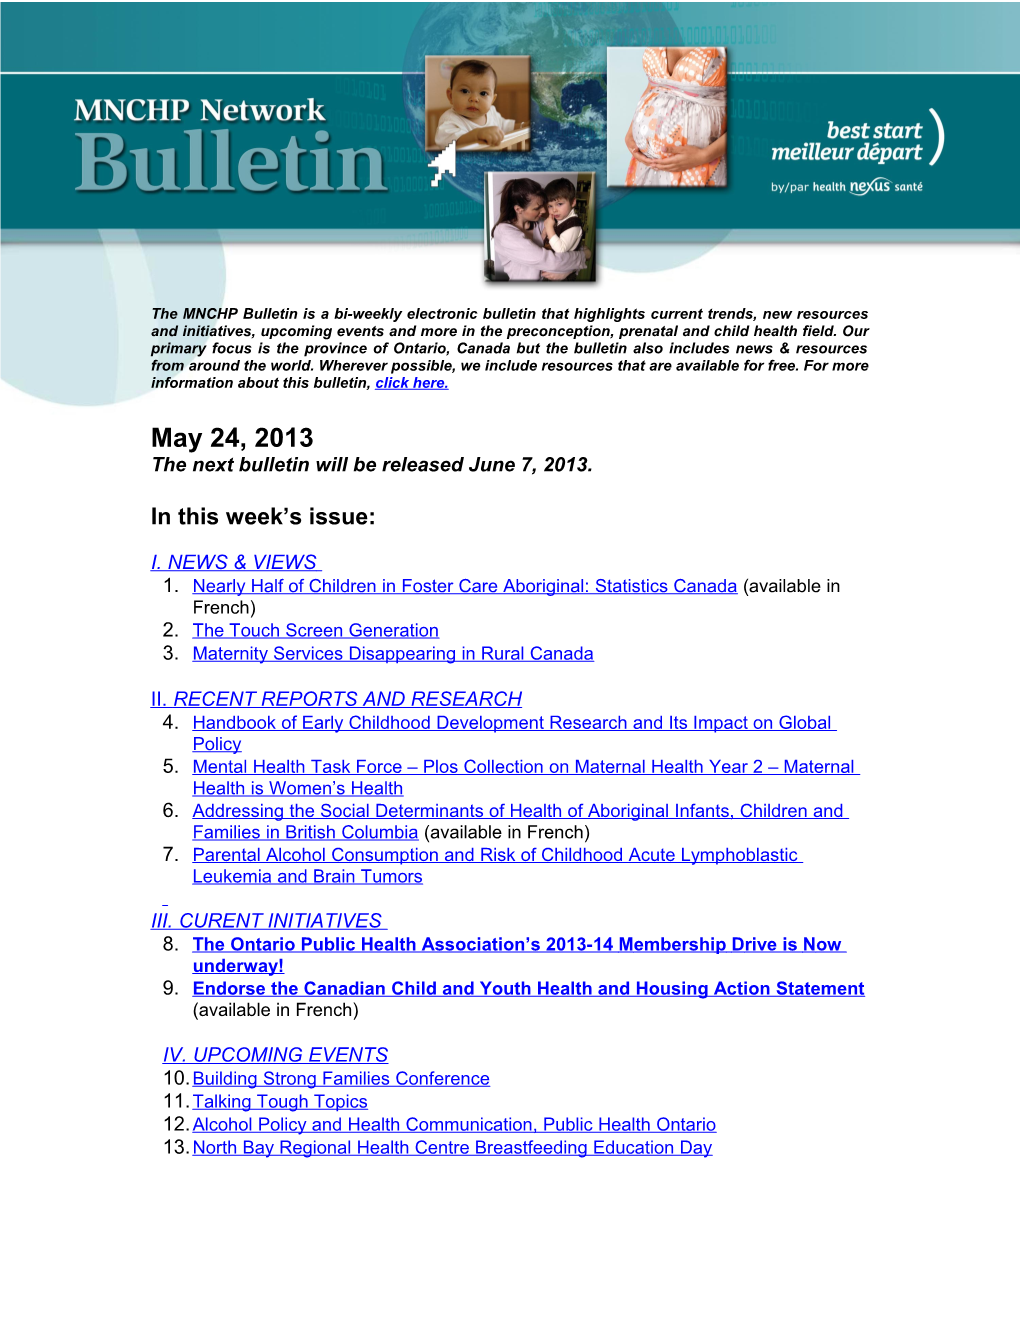 The Next Bulletin Will Be Released June 7, 2013